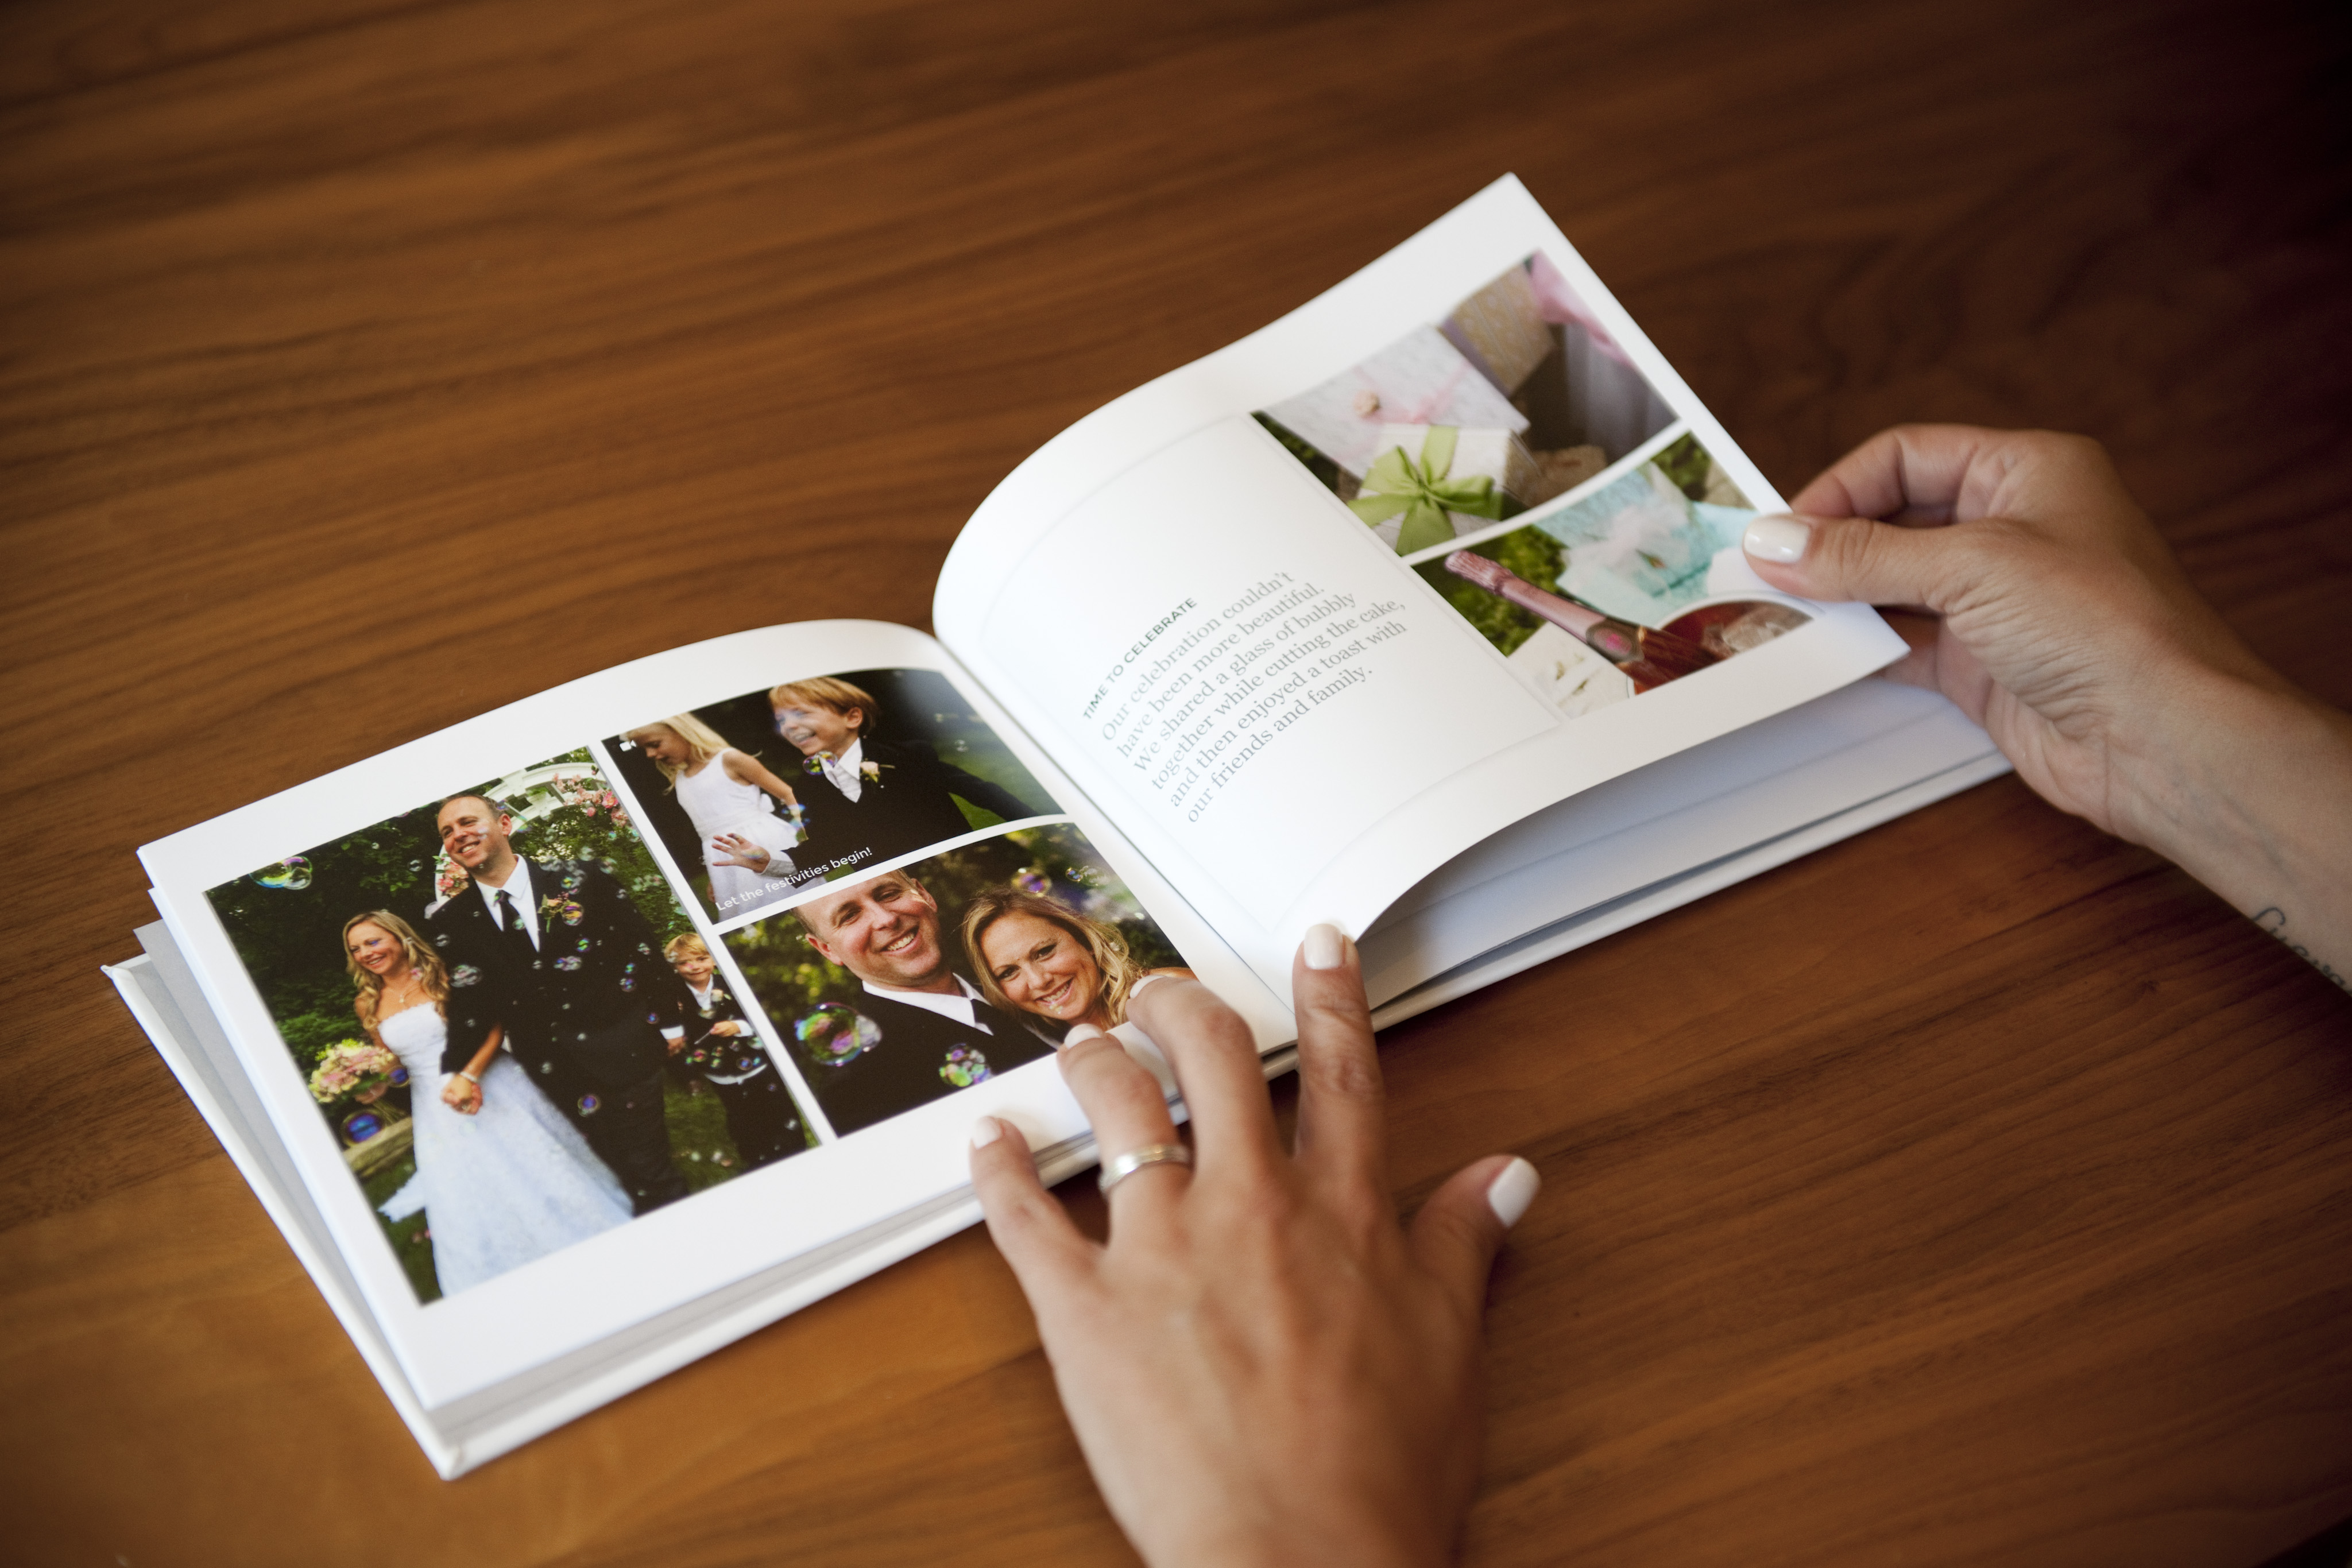 A Keepsayk instant scrapbook can be created, shared and printed right from your phone.